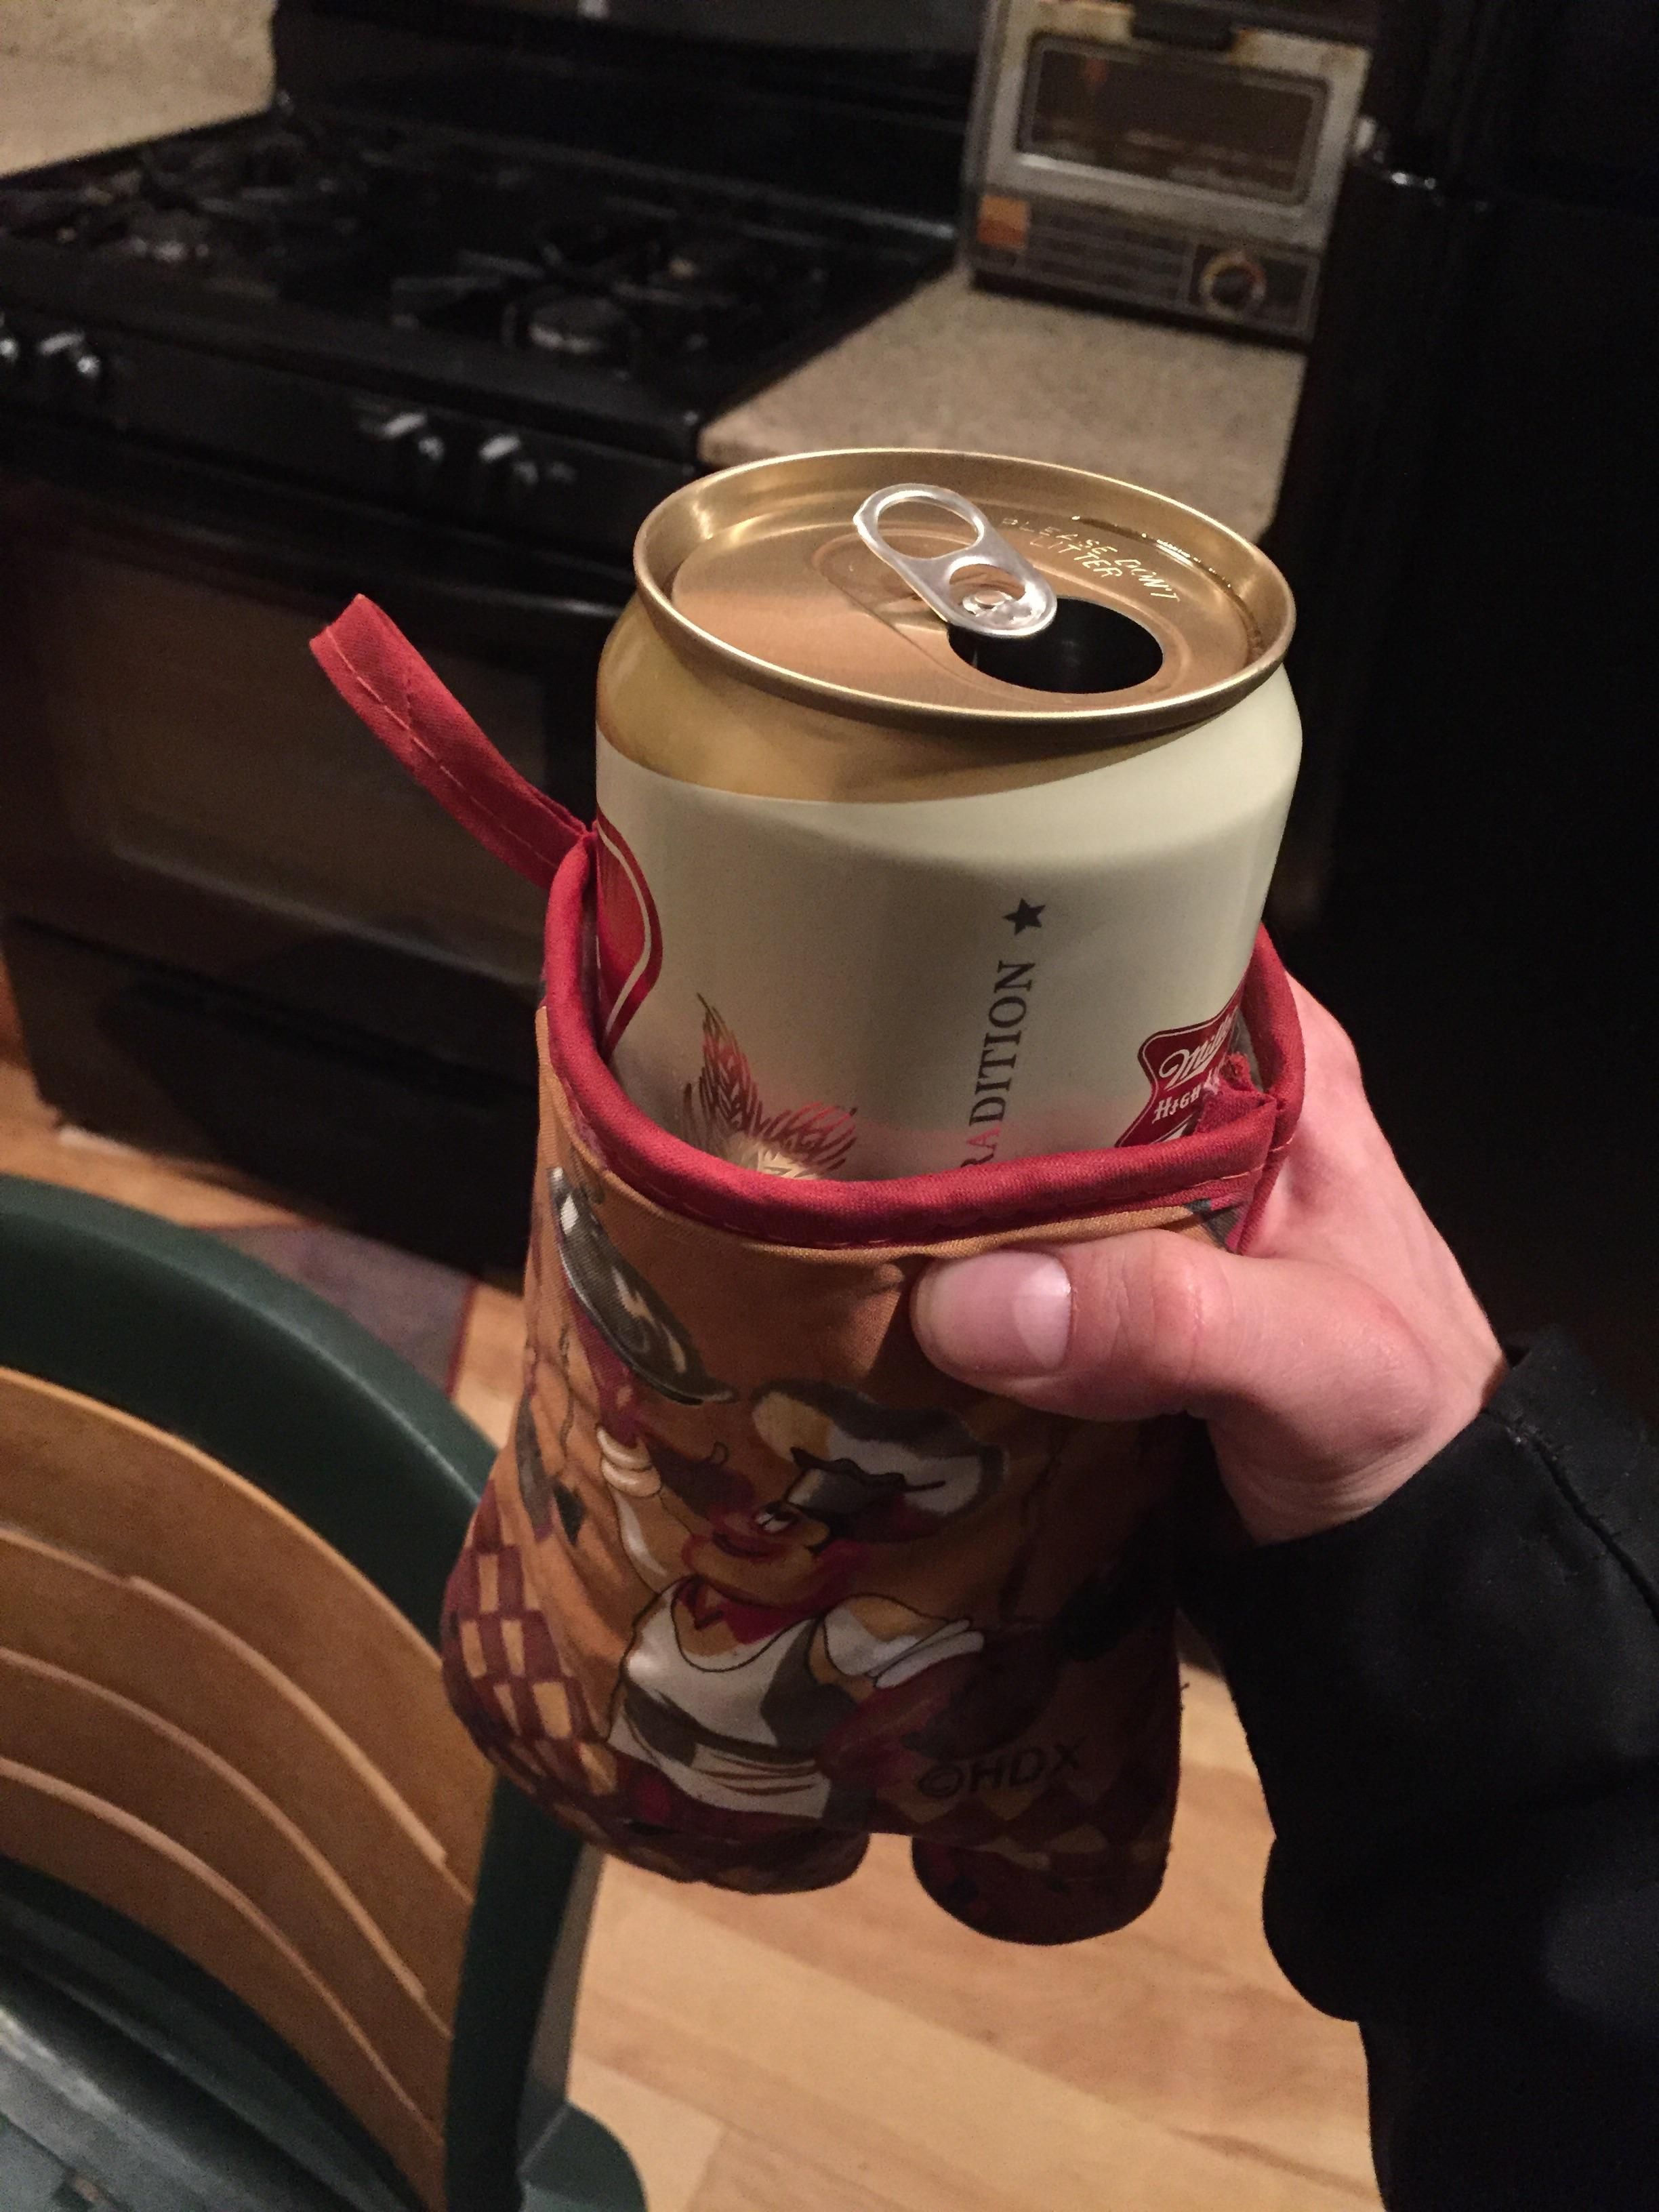 I jokingly asked my buddy for a coozy that would fit a 32oz can. Without missing a beat he threw me an oven mit.